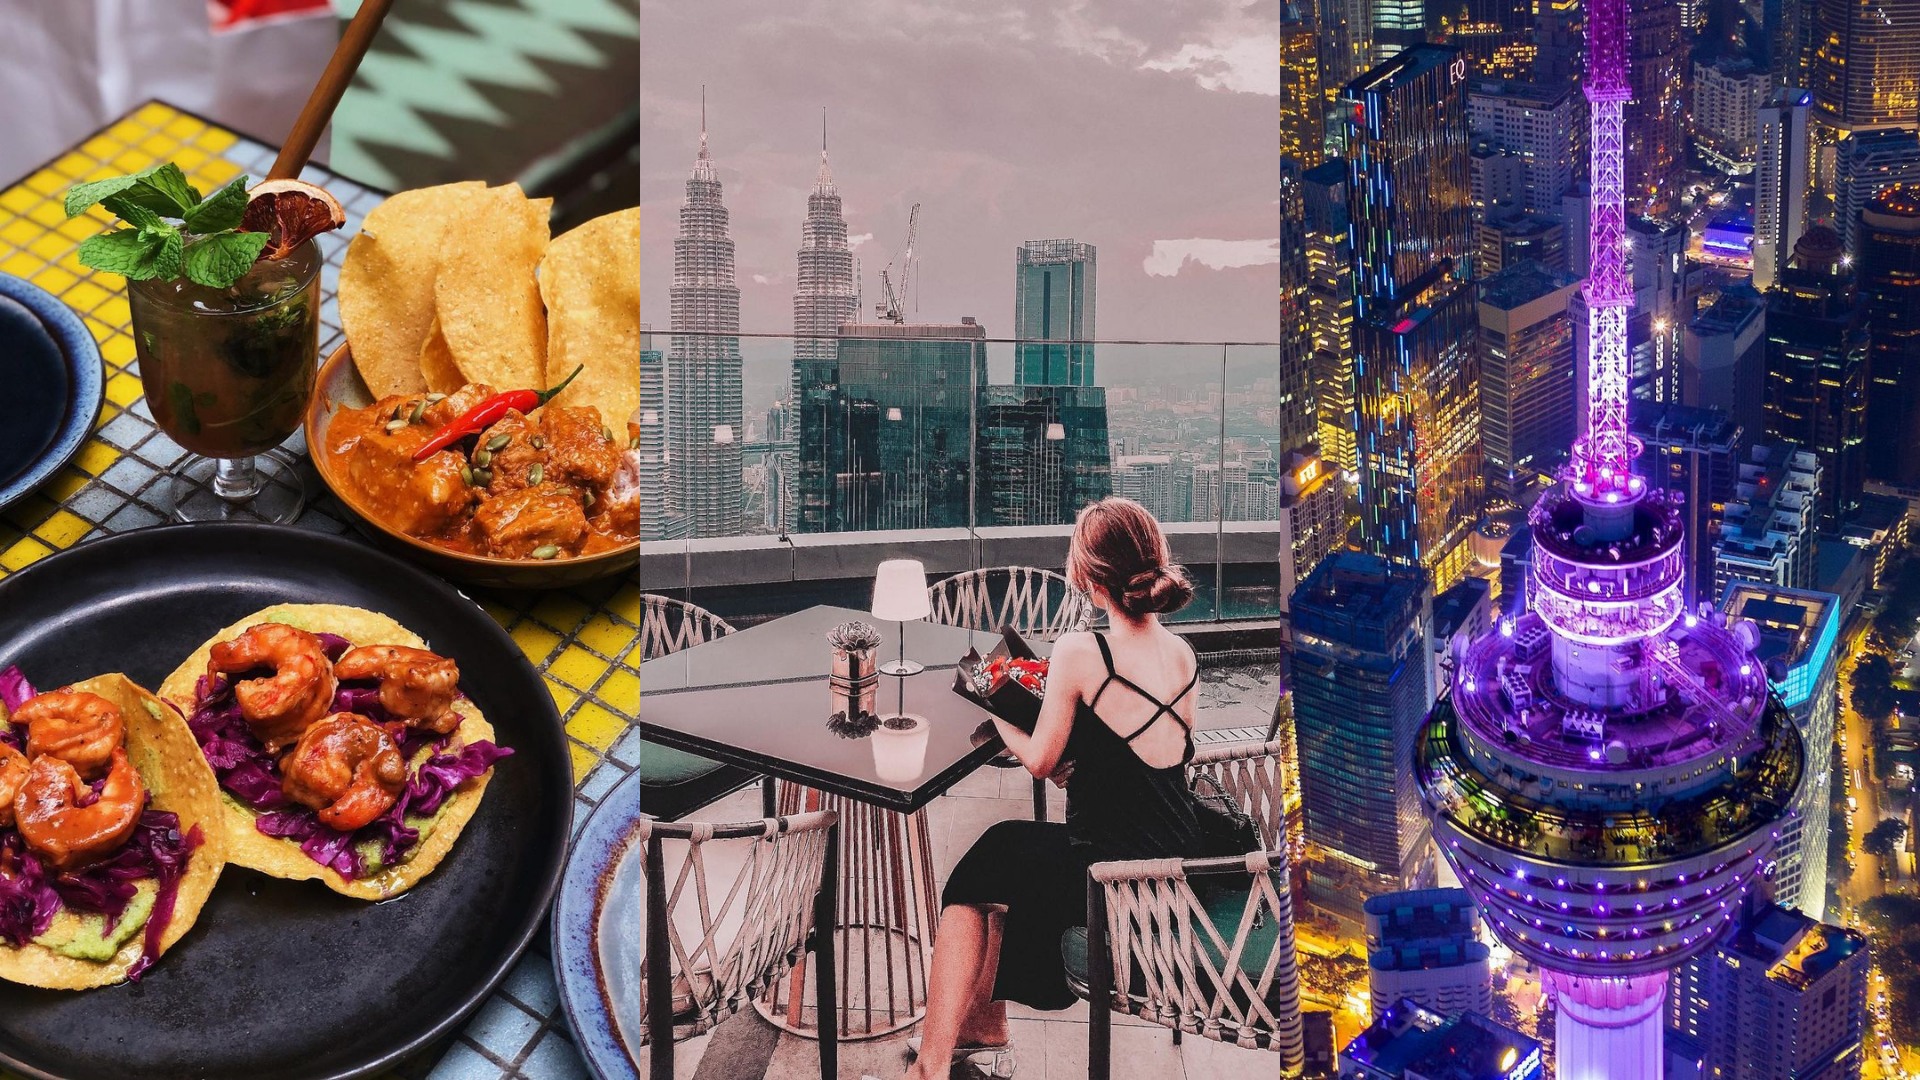 24 Best Restaurants In KL For Date Nights, Gatherings, And Special Celebrations - Klook Travel Blog